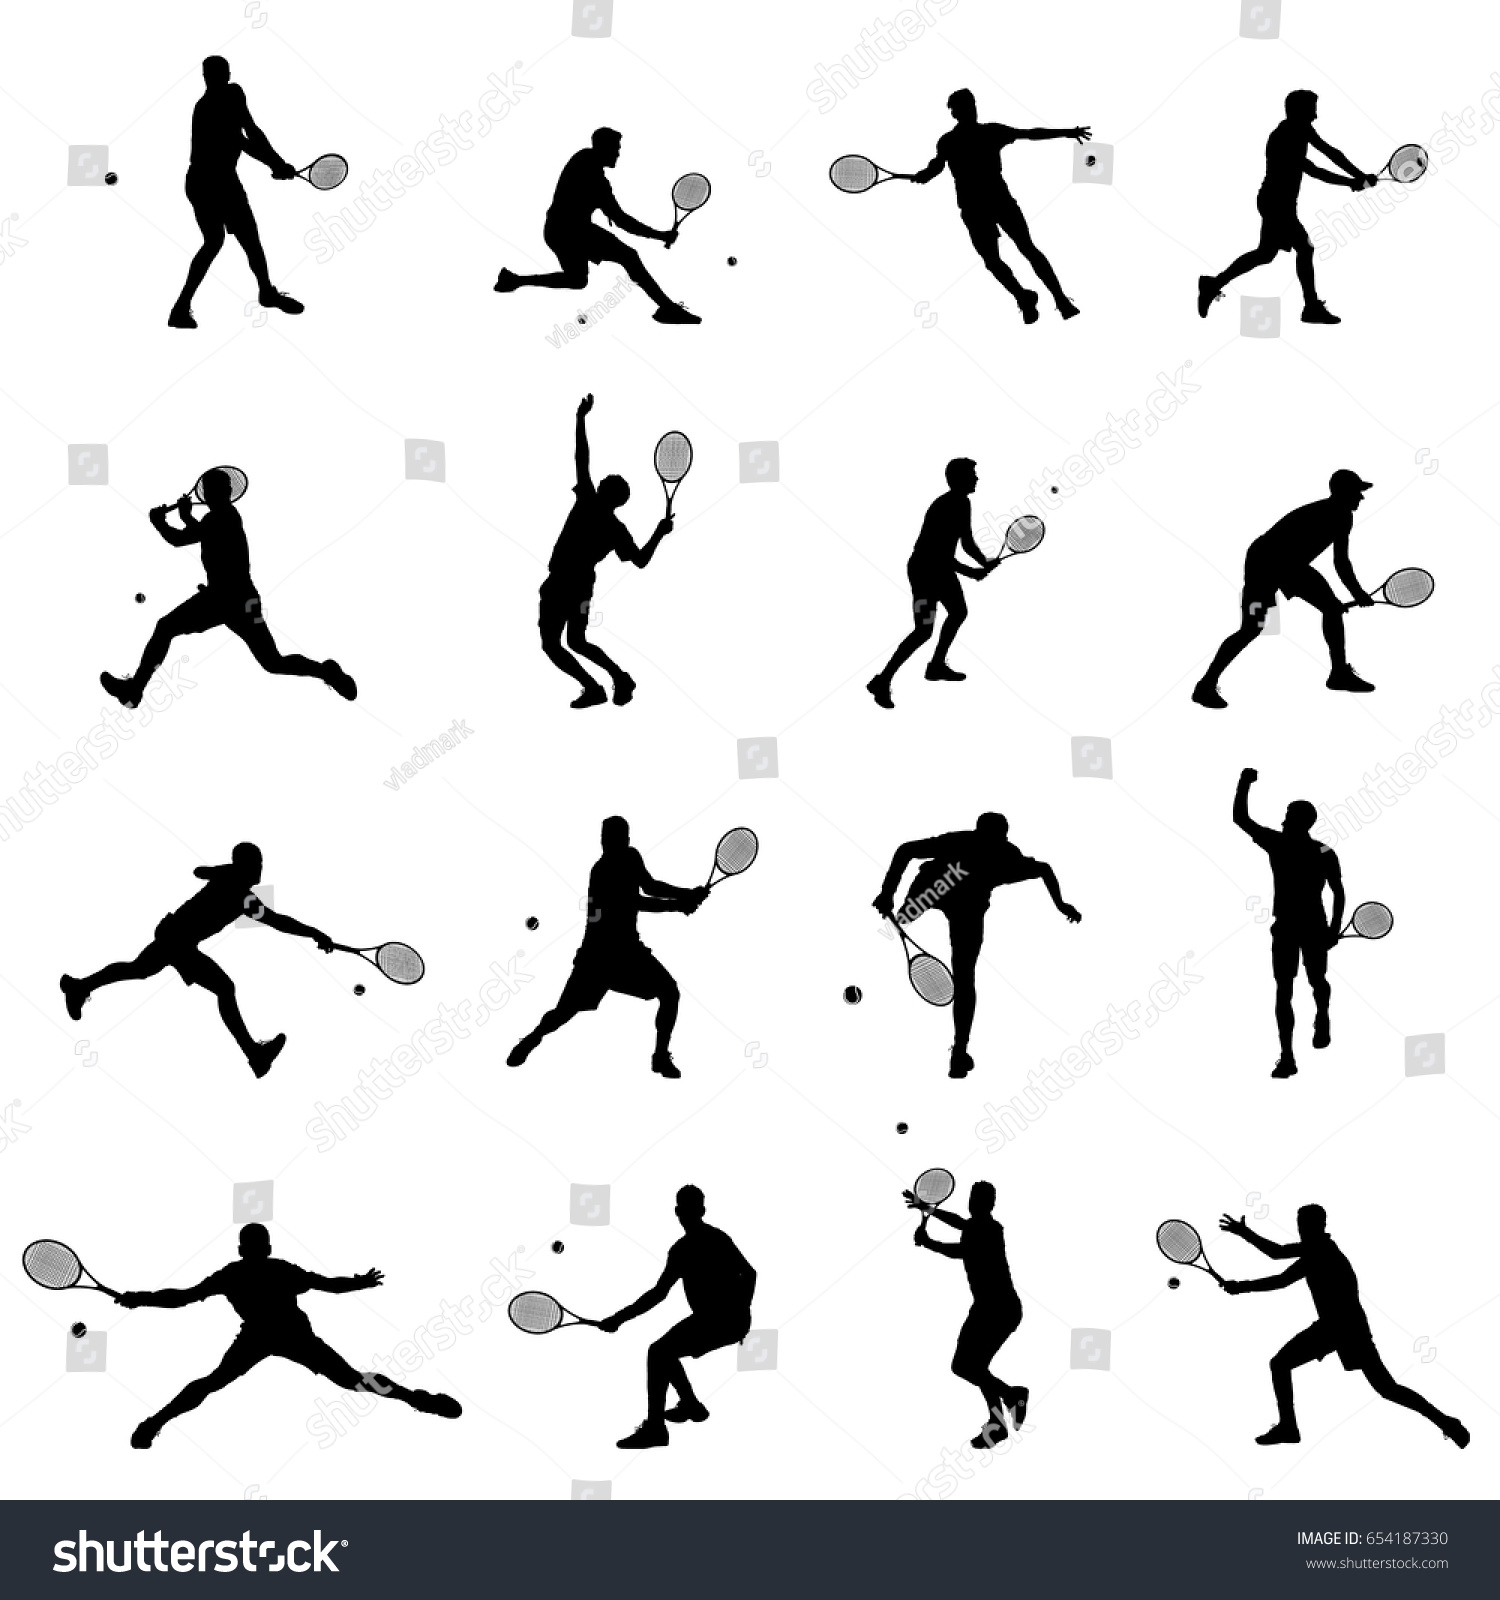 66 Indian tennis player Stock Illustrations, Images & Vectors ...